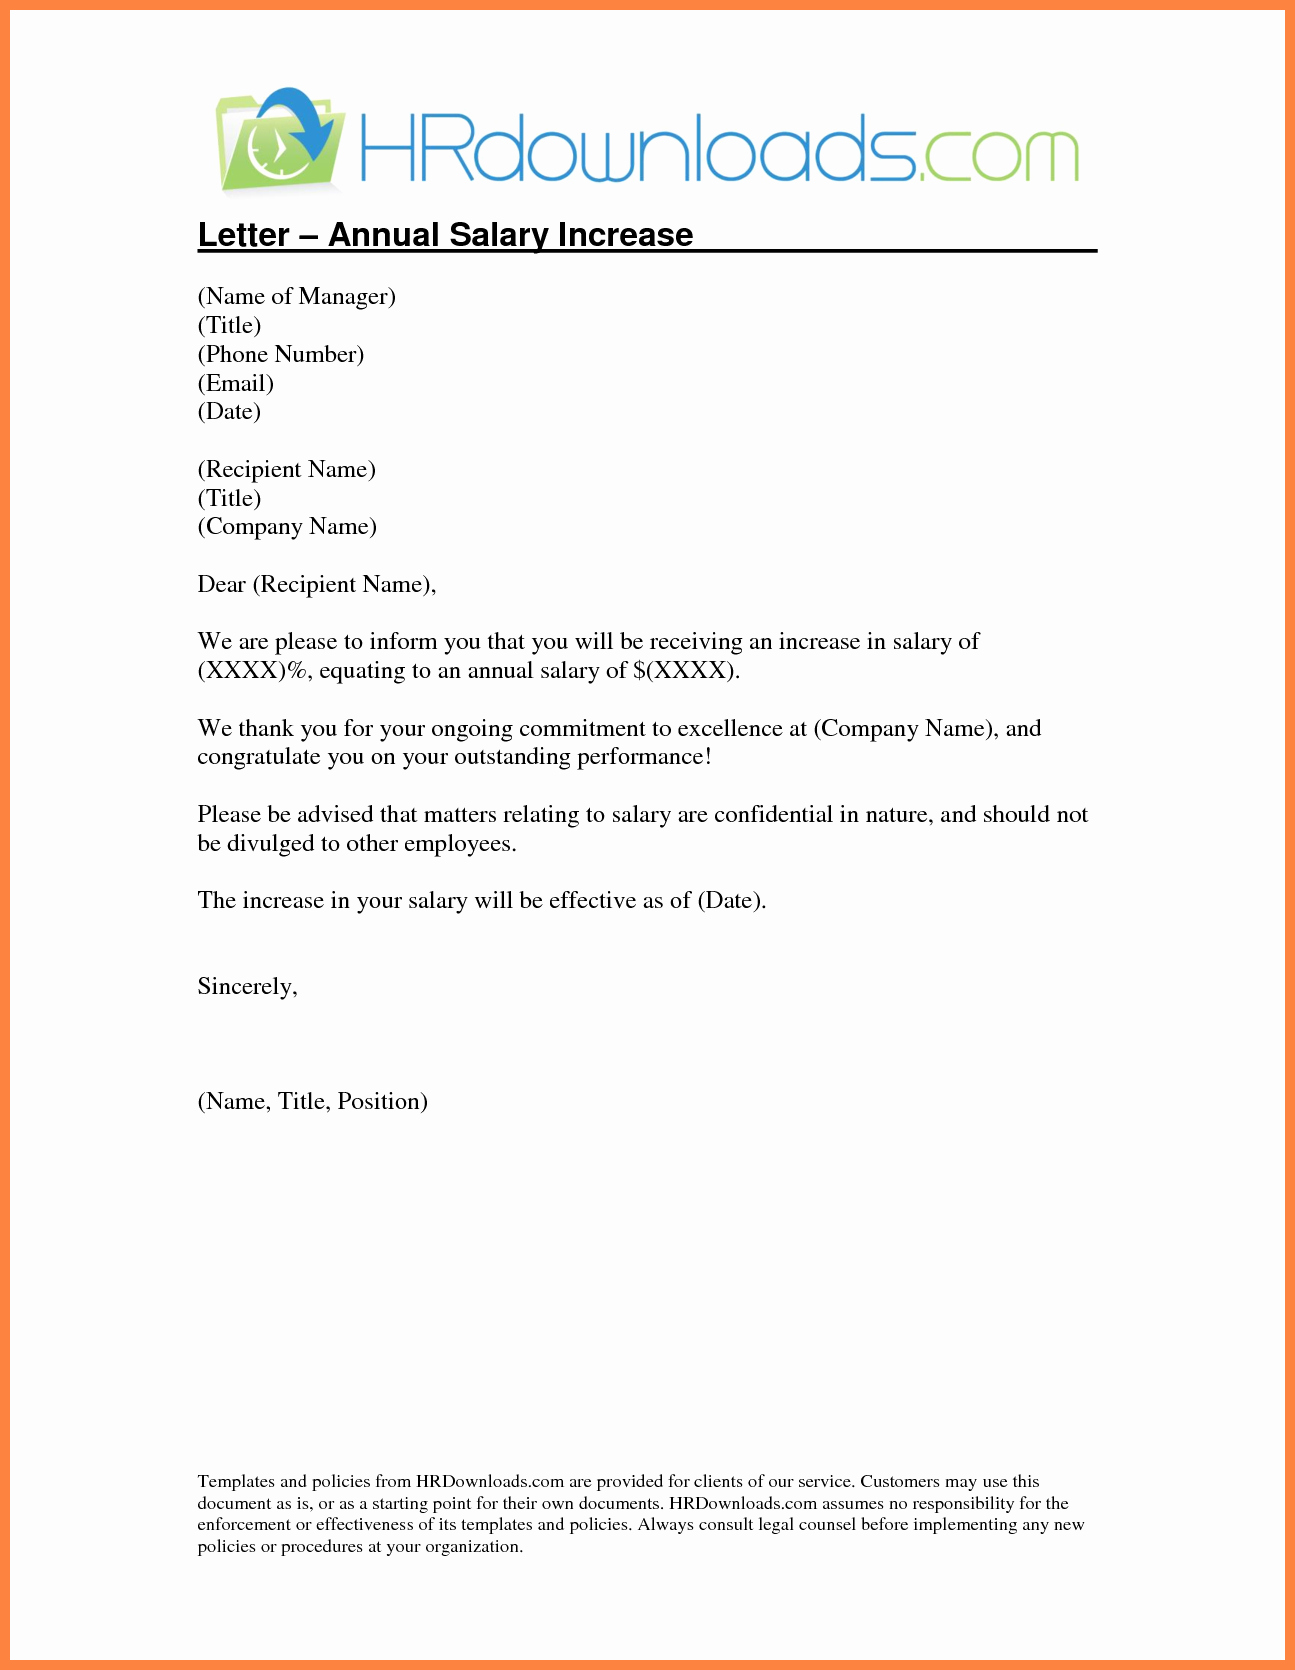 Salary Increase Letter format Best Of 5 Salary Increase Letter From Employer